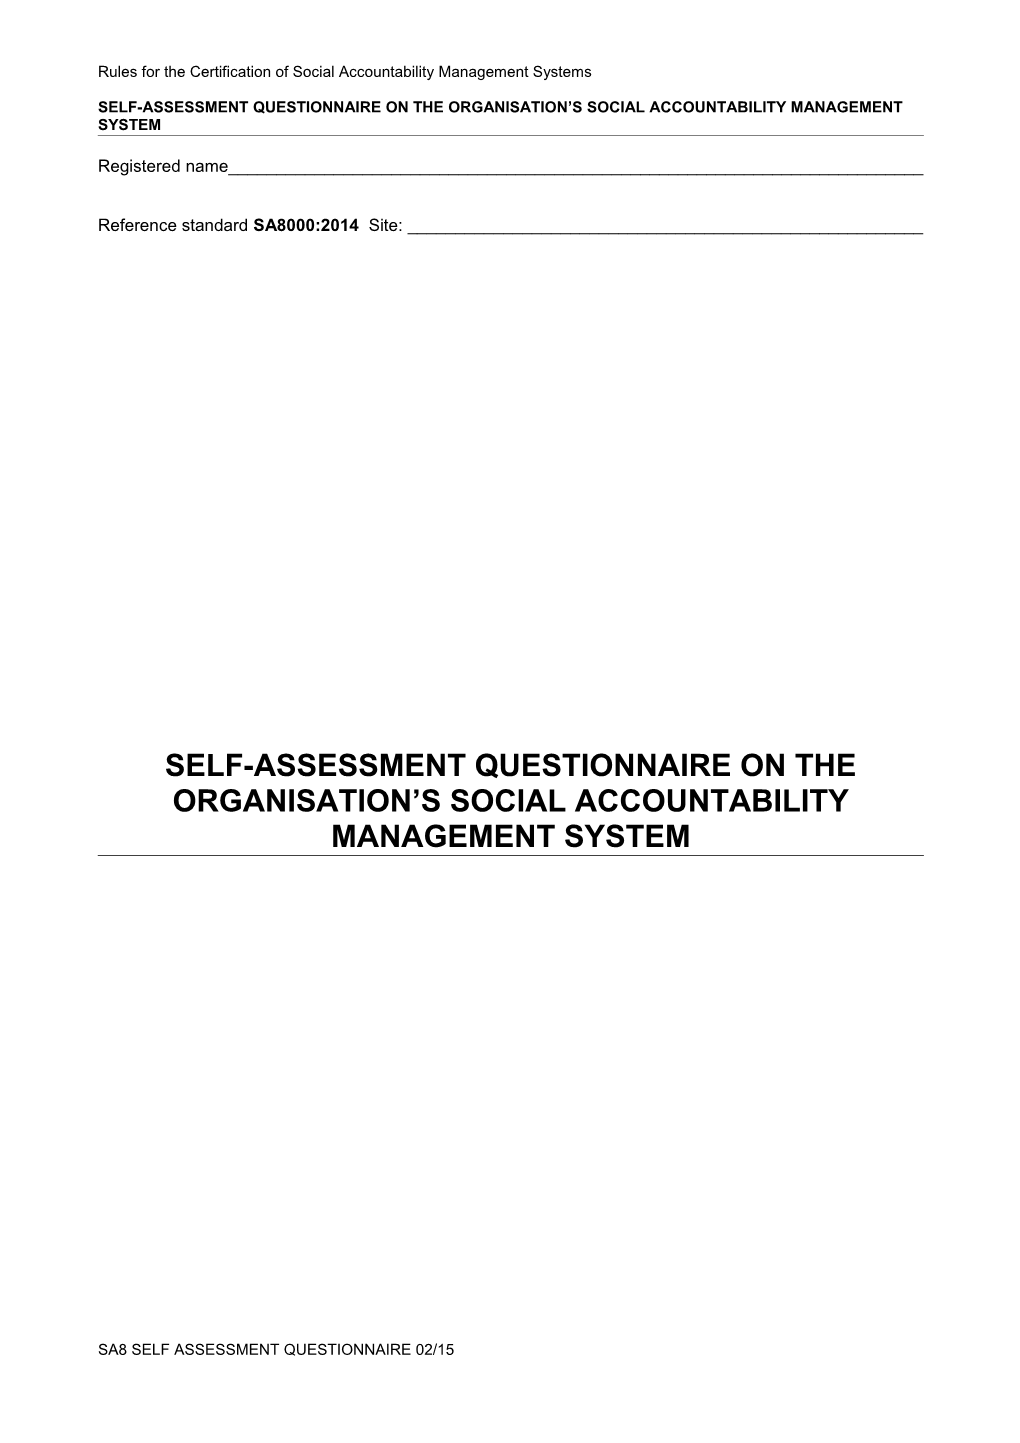 Self-Assessment Questionnaire on the Organisation S Social Accountability Management System